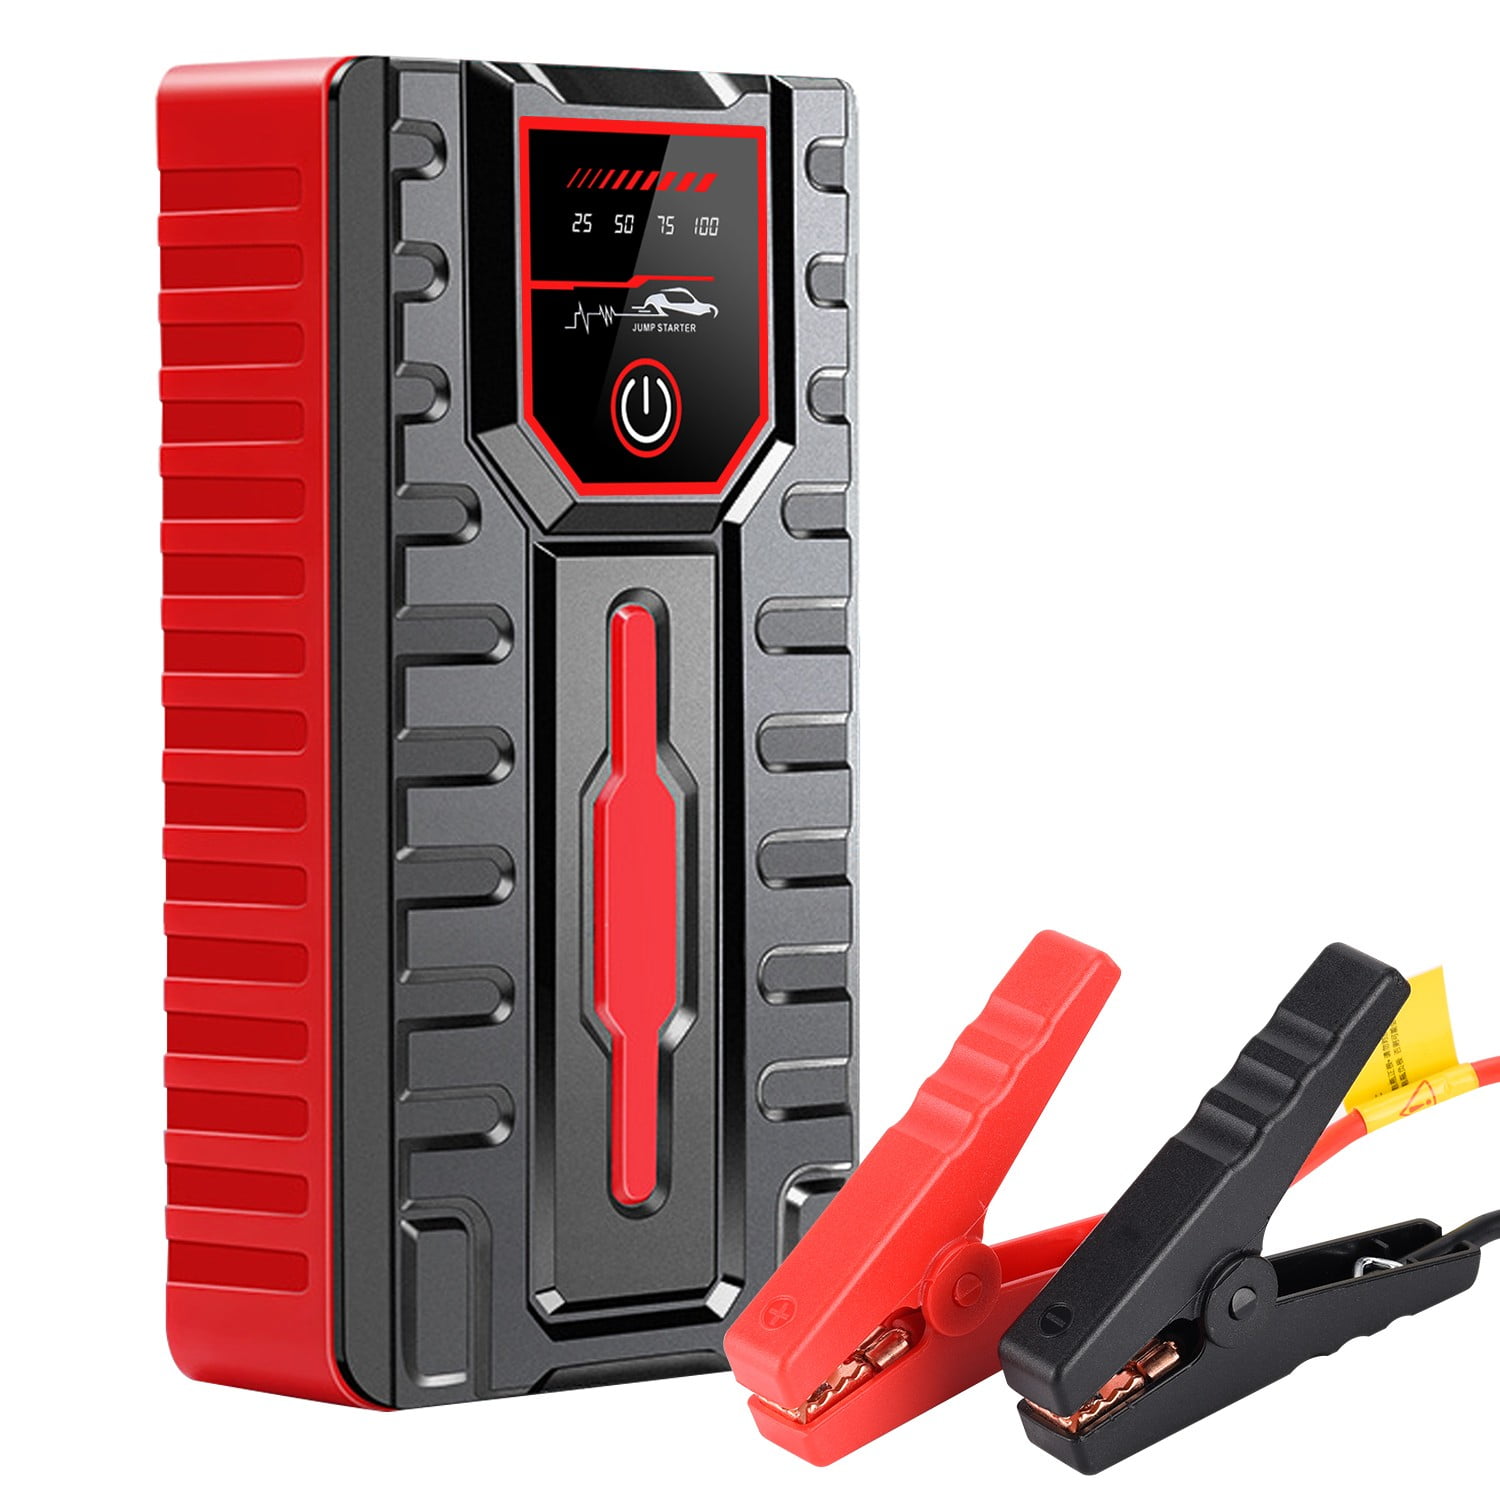 THINKCAR CJS101 - Portable Vehicle Battery Jump Starter 12 Volt for Cars,  Trucks, Motorcycles, Boats